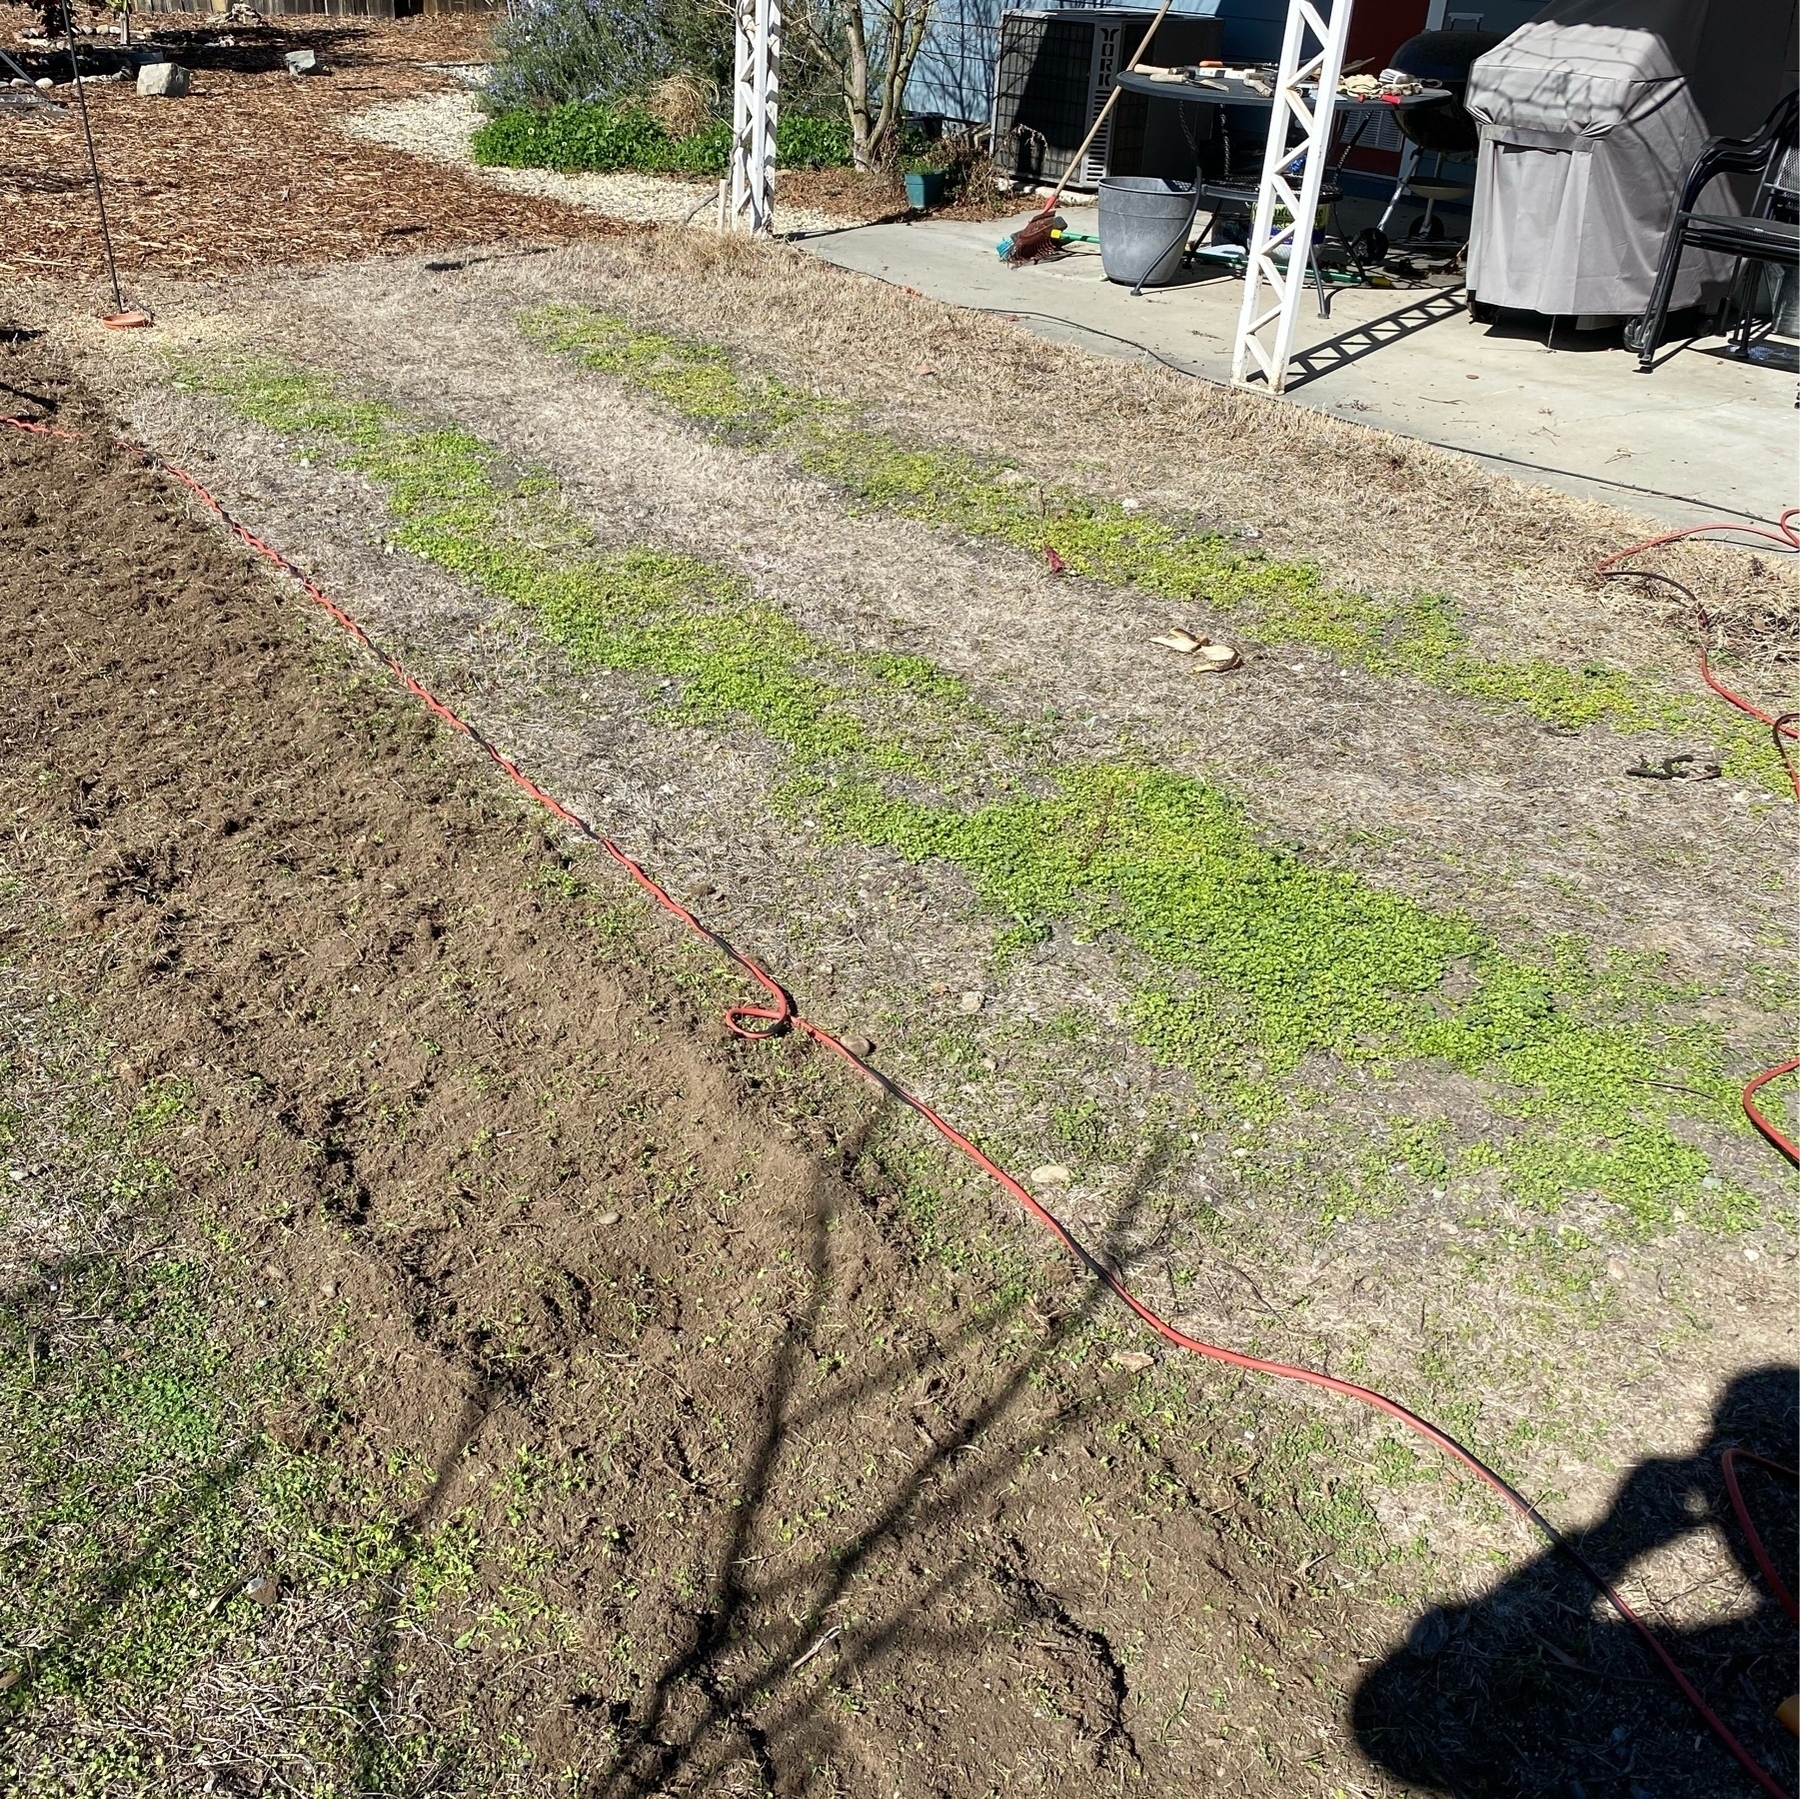 before most of the lawn removal, showing three garden rows but not yet prepared